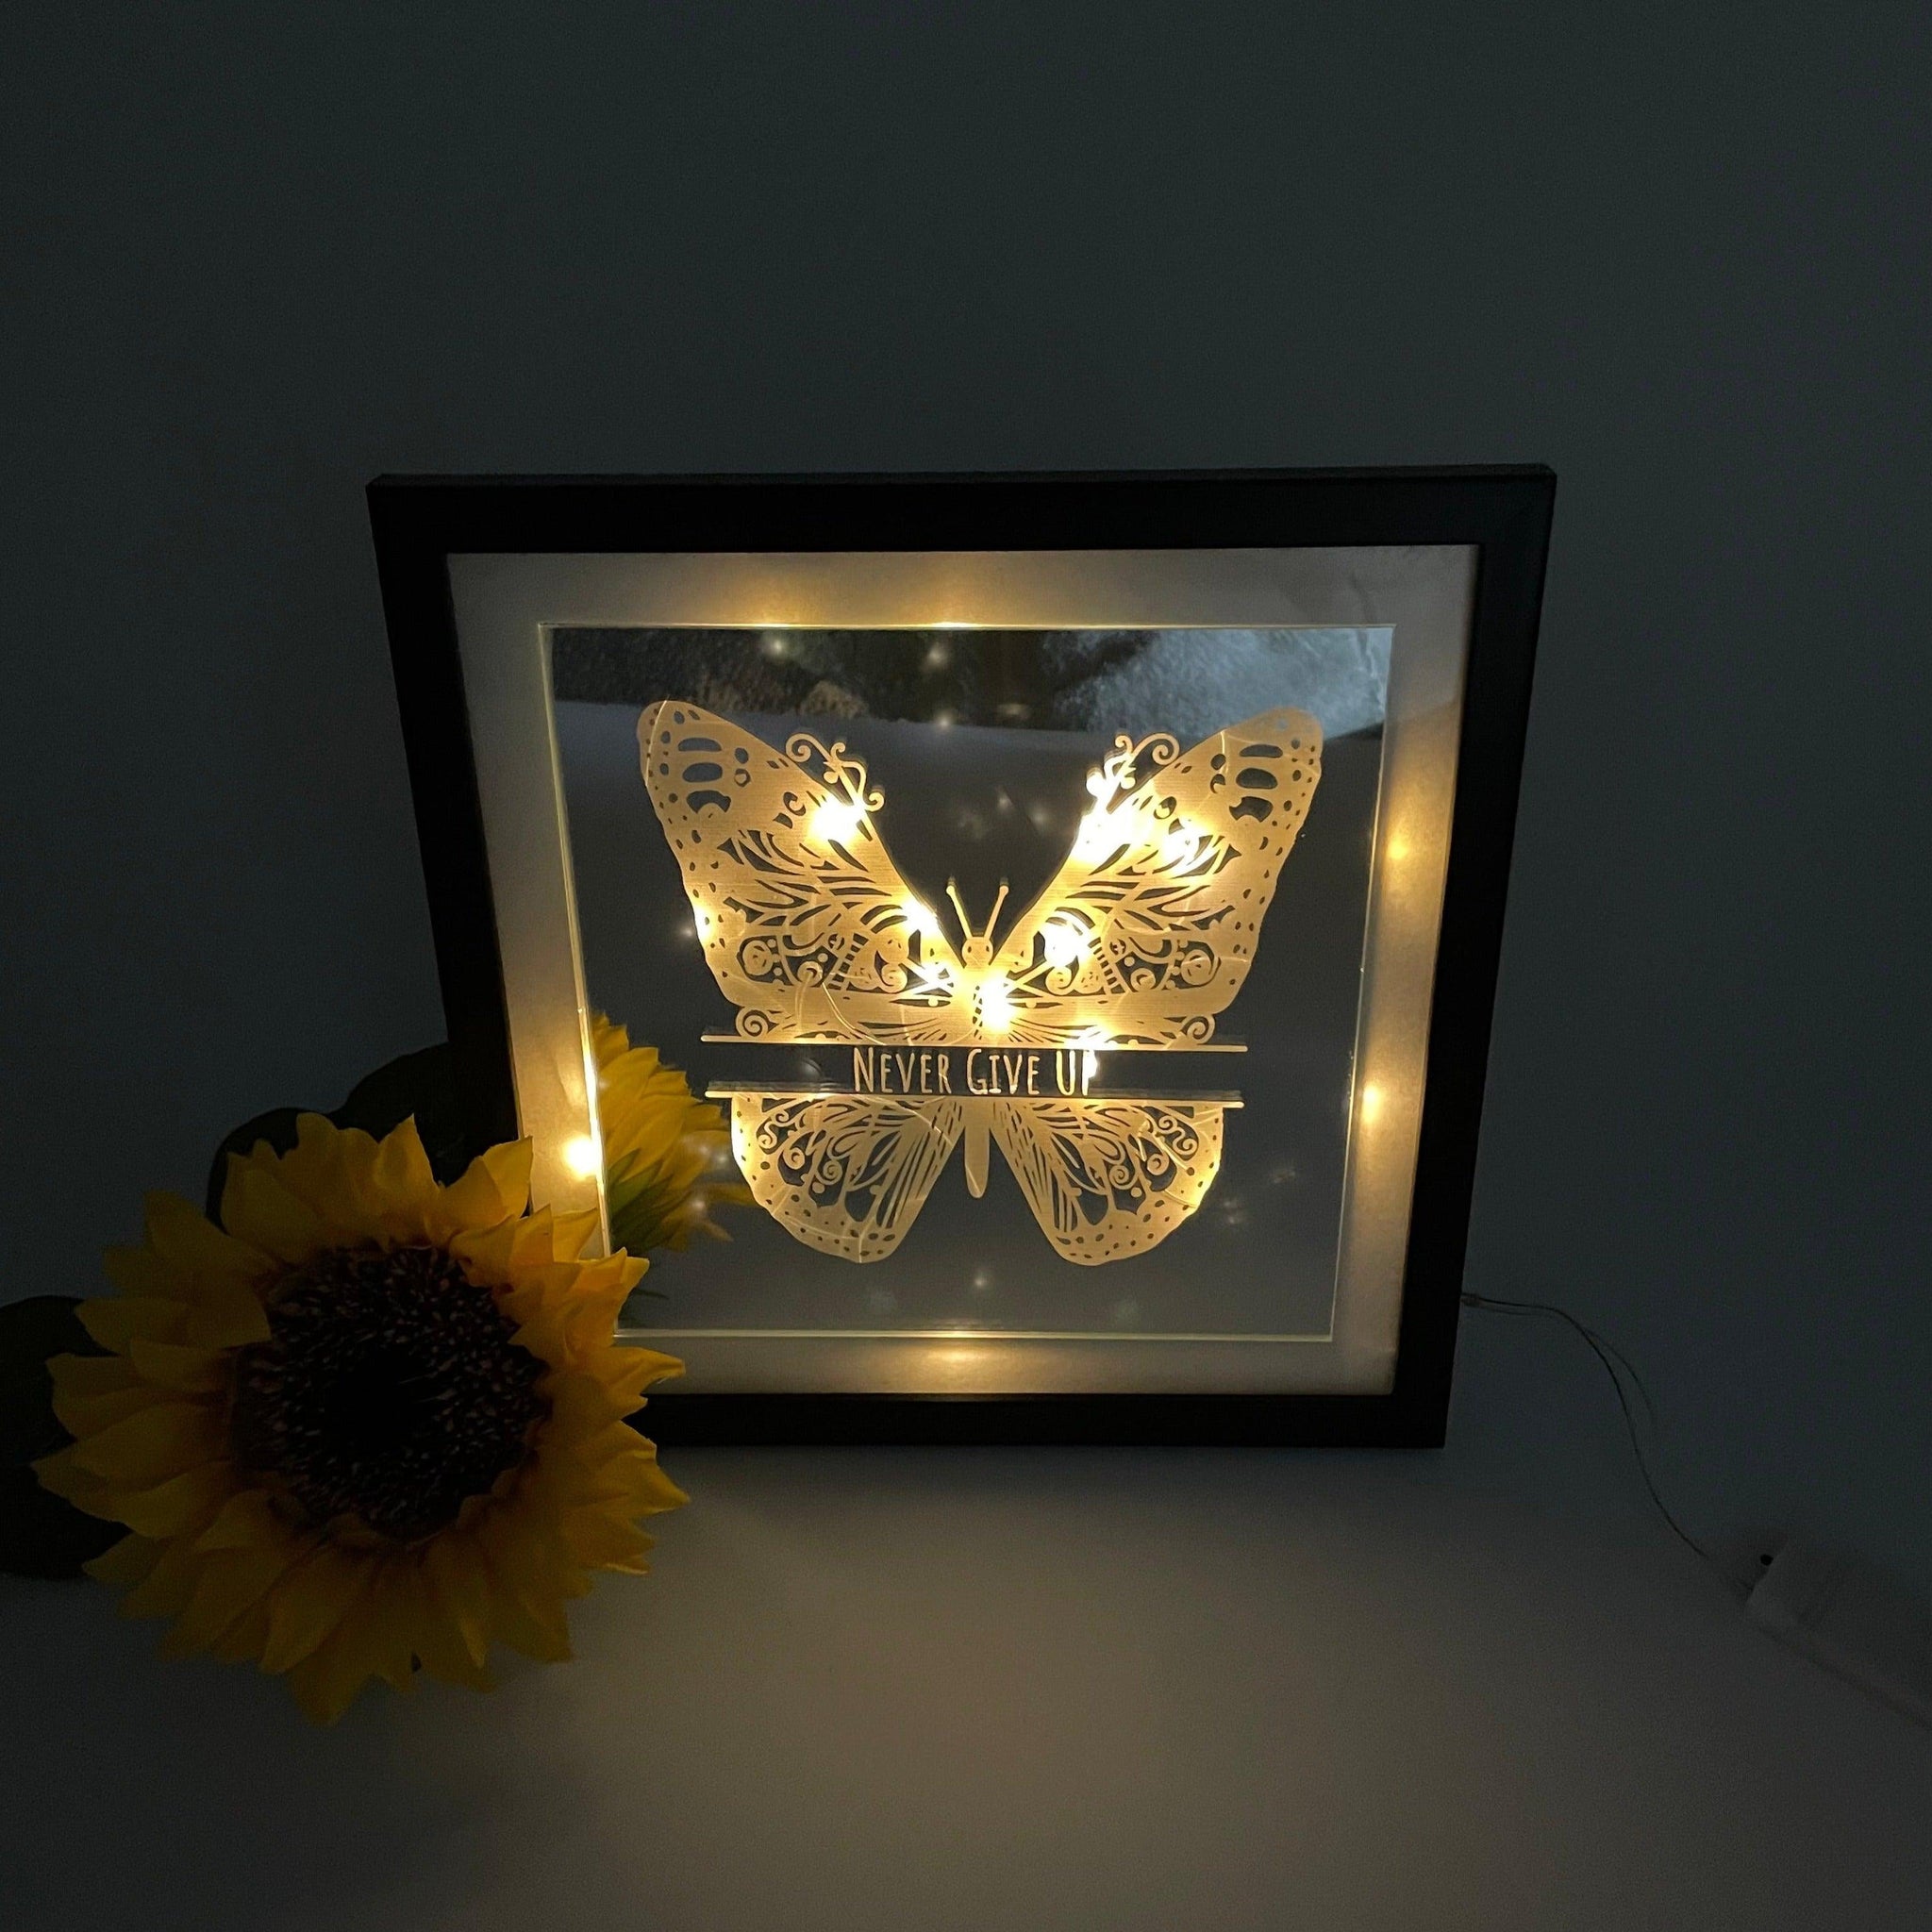 Personalized Framed Mirror with LED Lighting - A Unique Decorative Object for Your Home! - GiftShop.lu